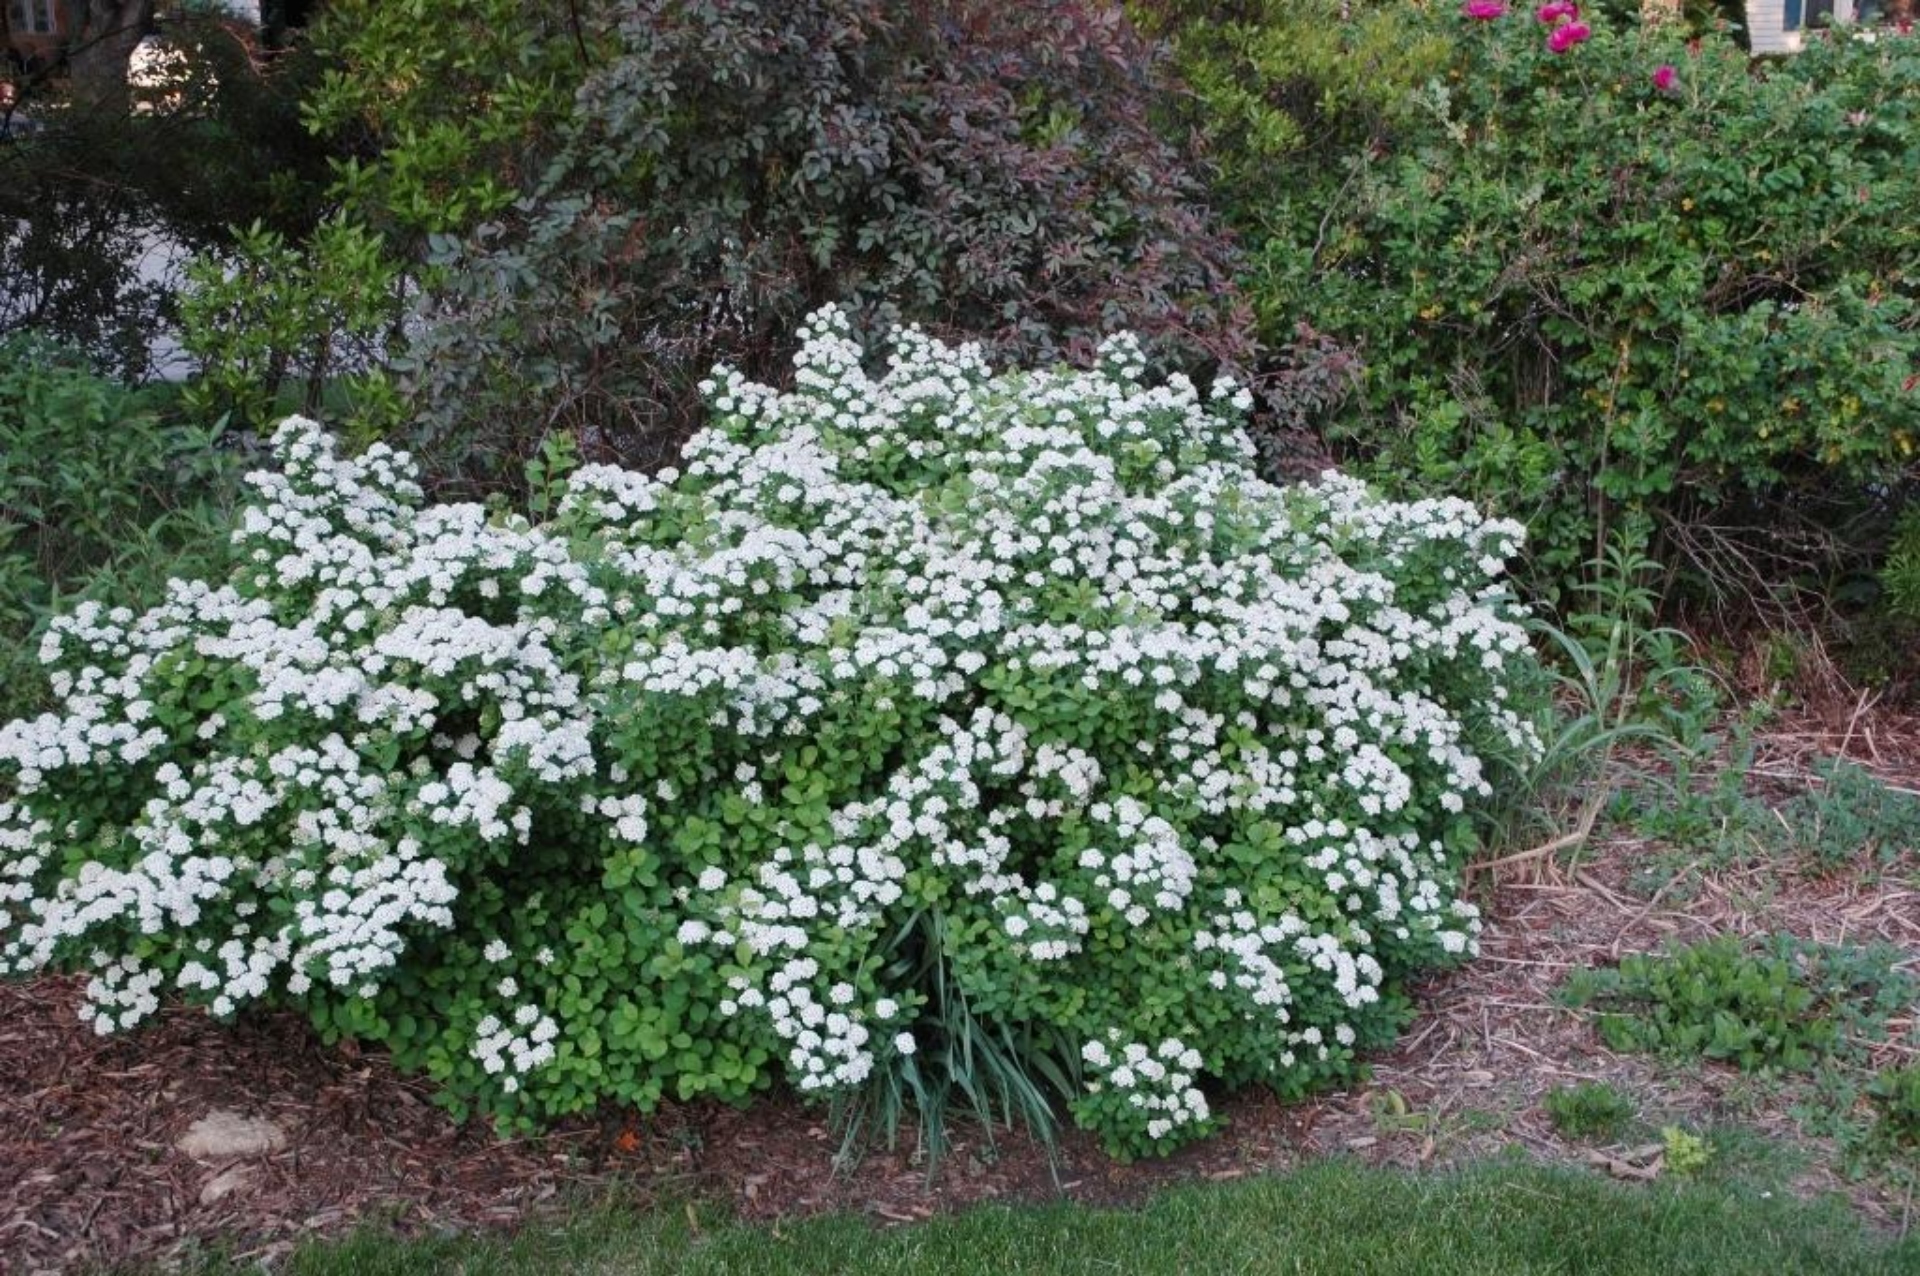 Image of Tor spirea plant in a garden setting